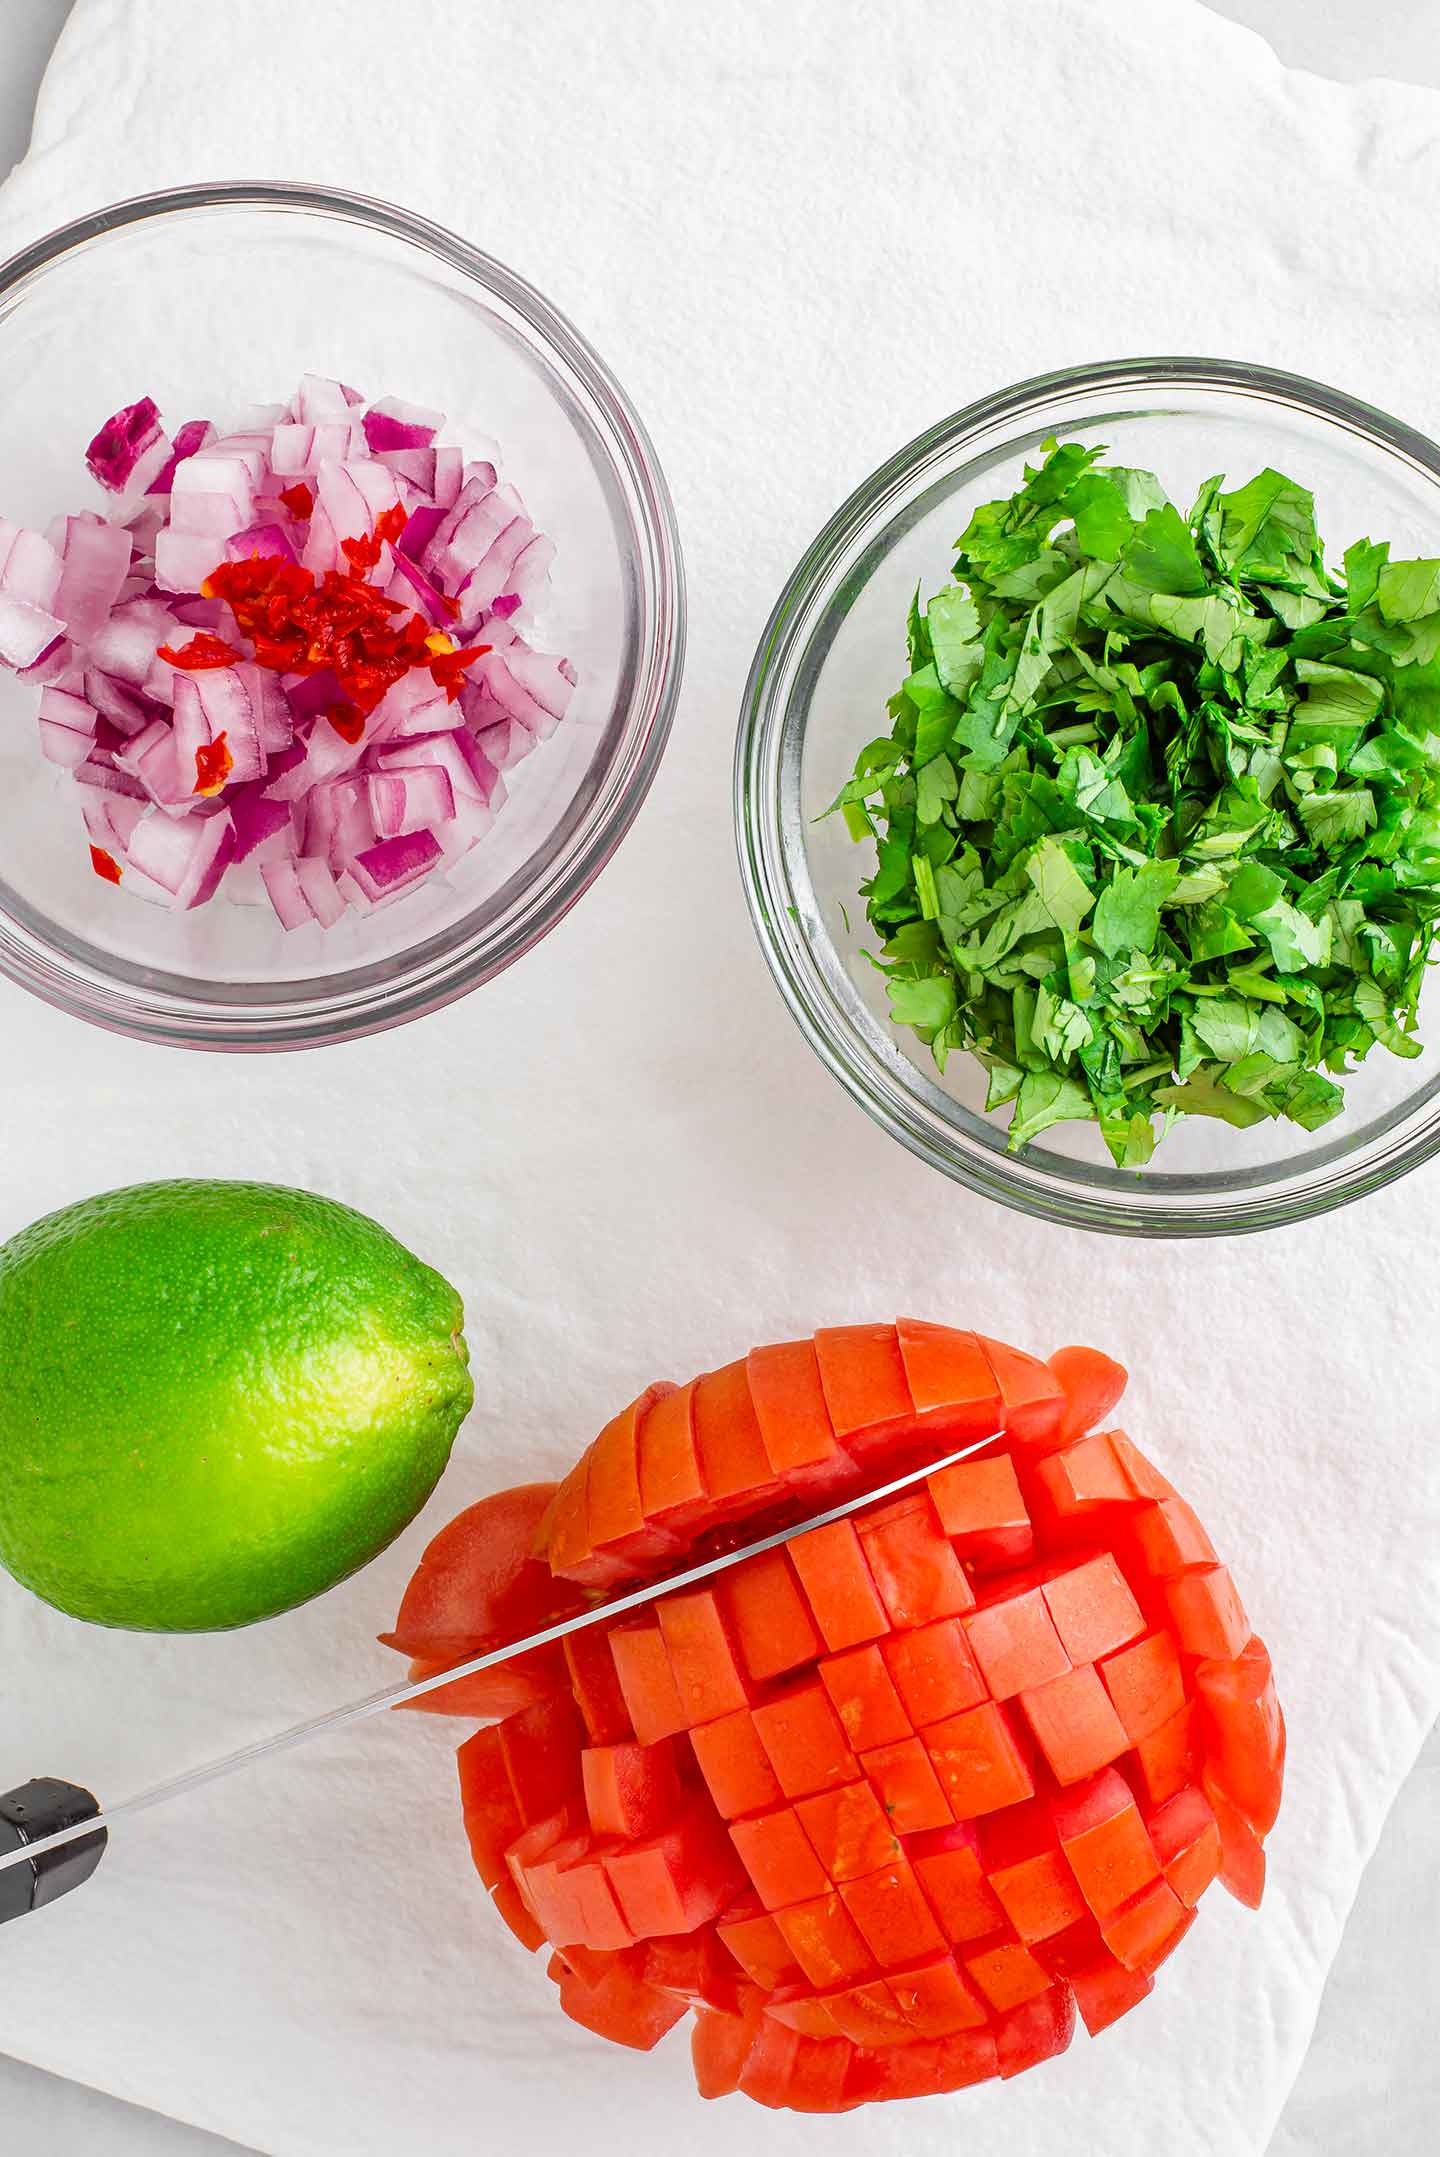 Top down view of a tomato still intact but sliced in a checkered pattern. A knife rests in one of the cuts and diced red onion, chopped cilantro, and a fresh lime surround the tomato.